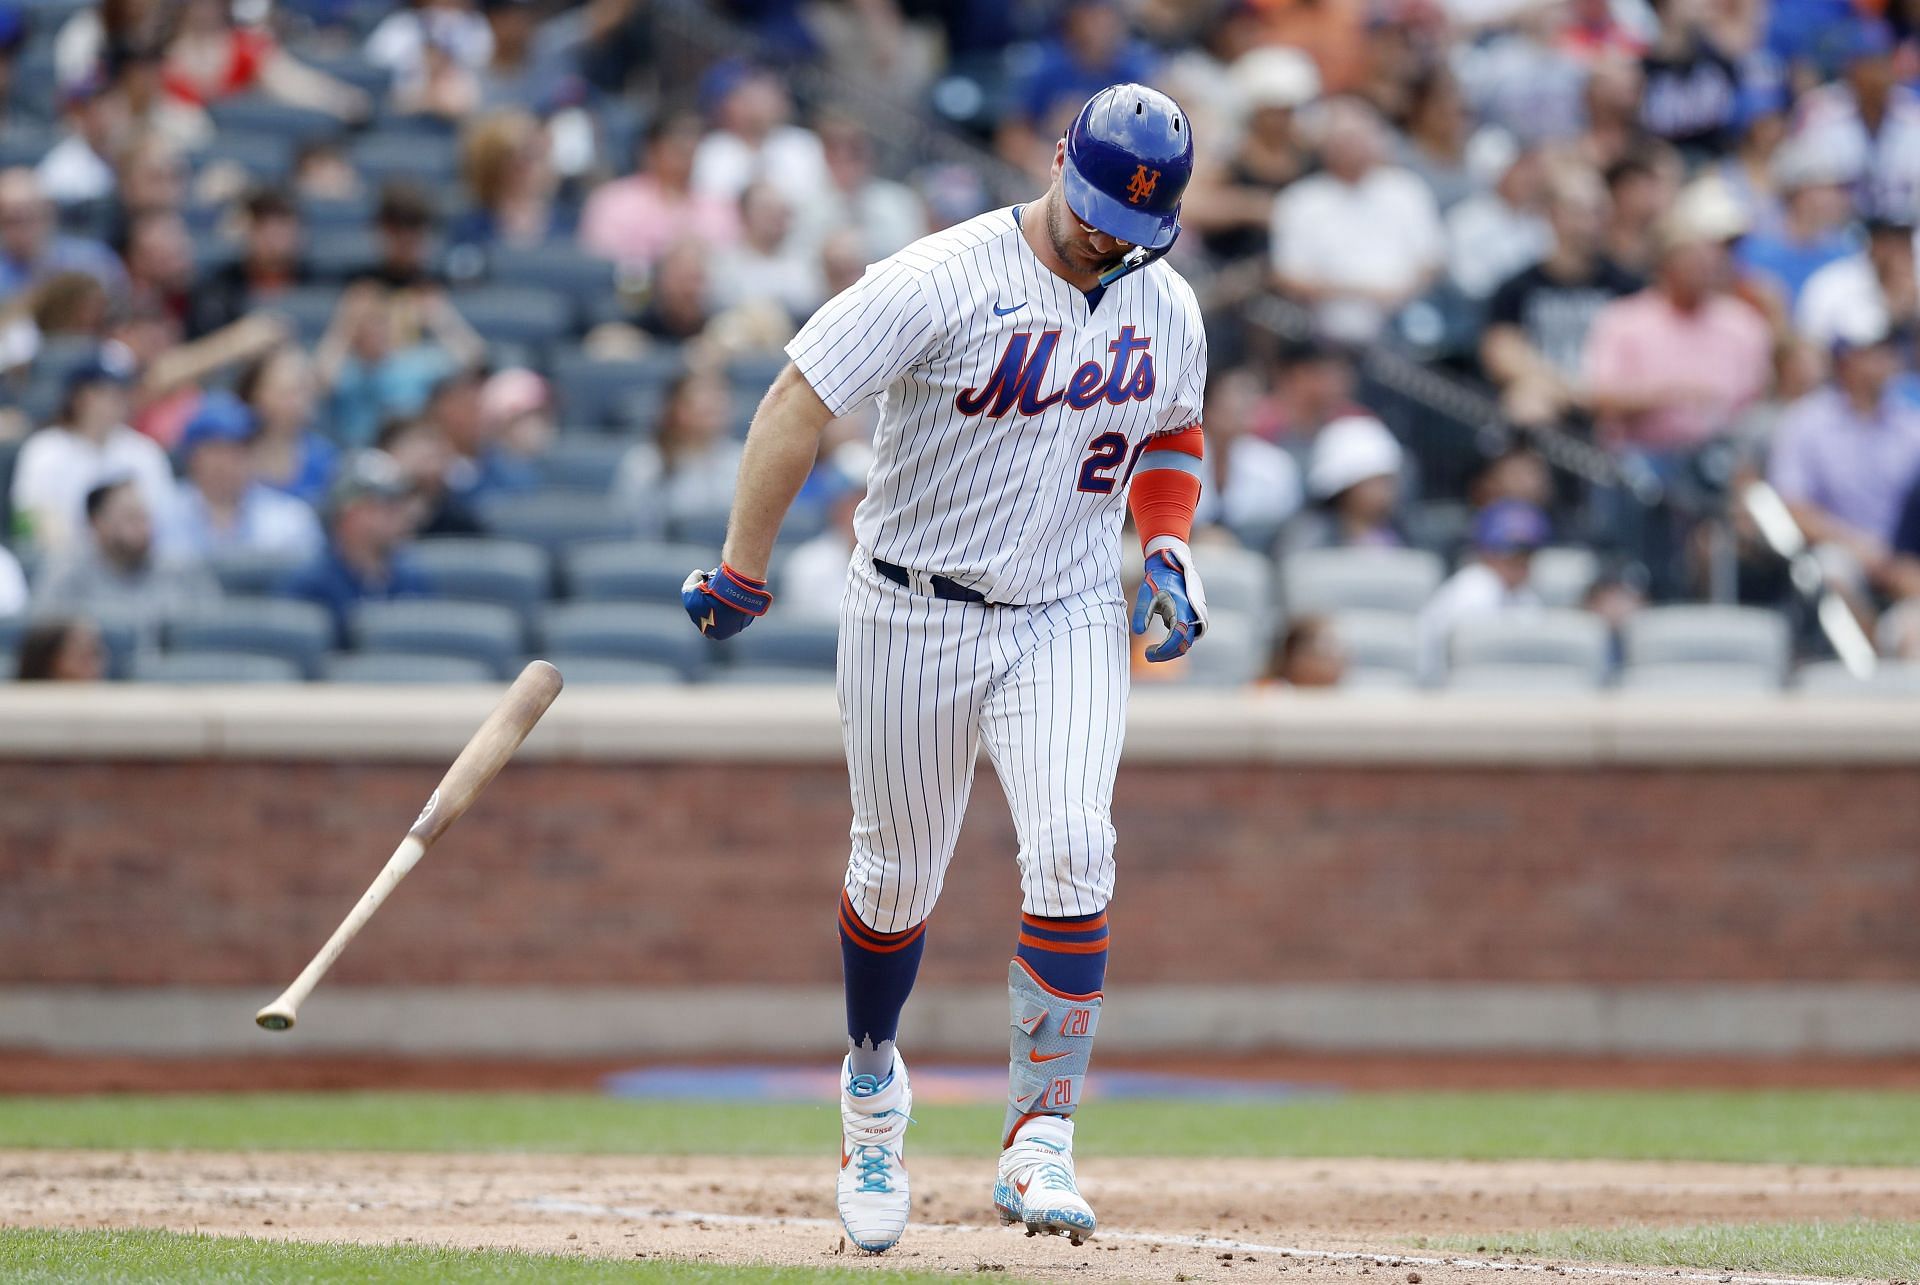 Pete Alonso provides Mets' best chance to break MVP drought